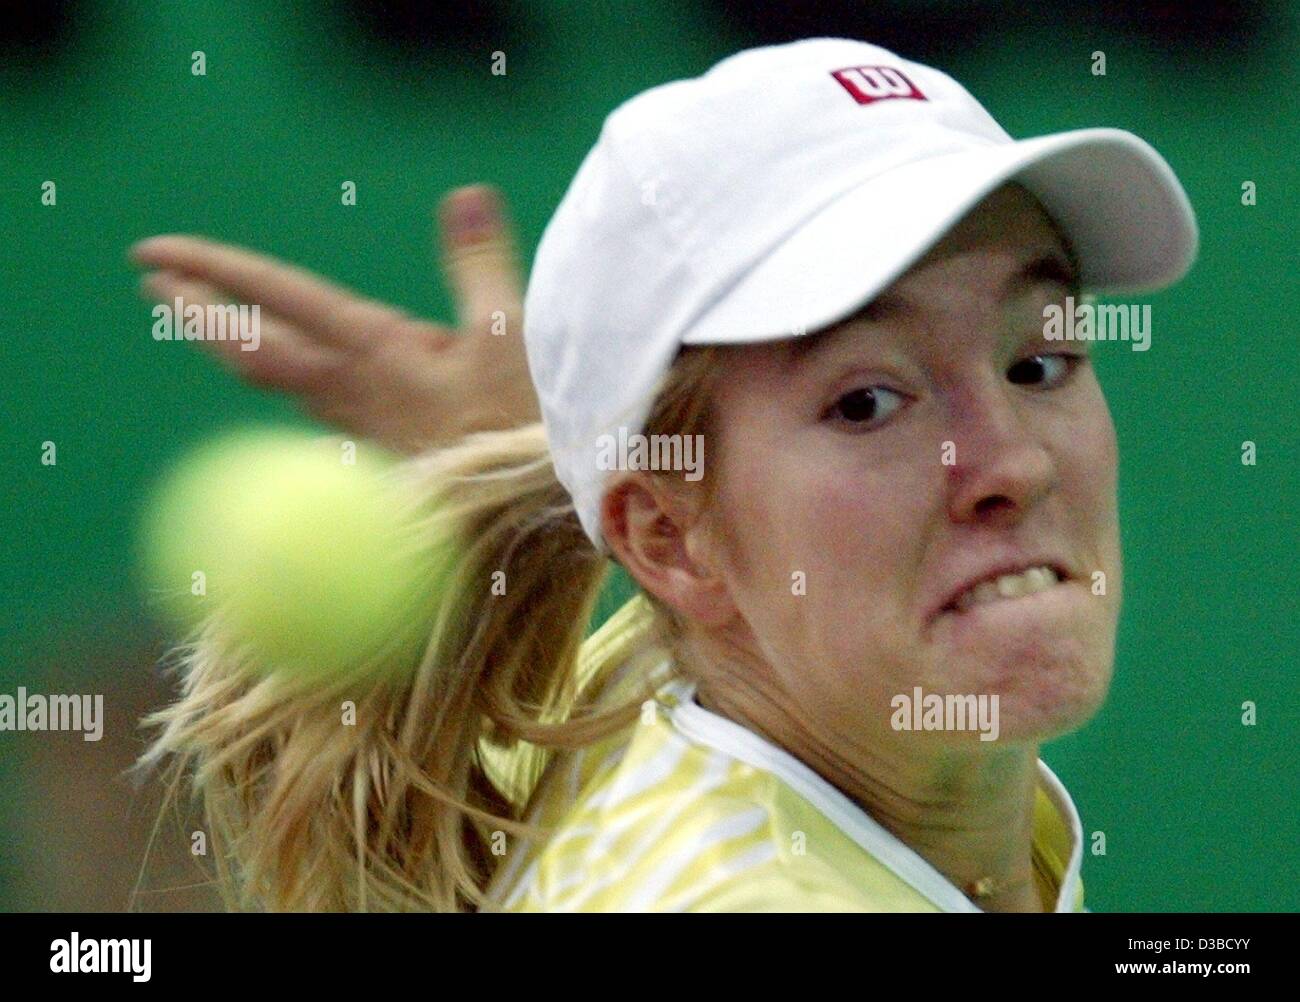 (dpa) - Belgium's Justine Henin returns a ball during the quarter final match of the 13th International Sparkassen Cup WTA Tournament in Leipzig, Germany, 27 September 2002. She defeats Slovakia's Daniela Hantuchova 6:4 and 7:5. Stock Photo